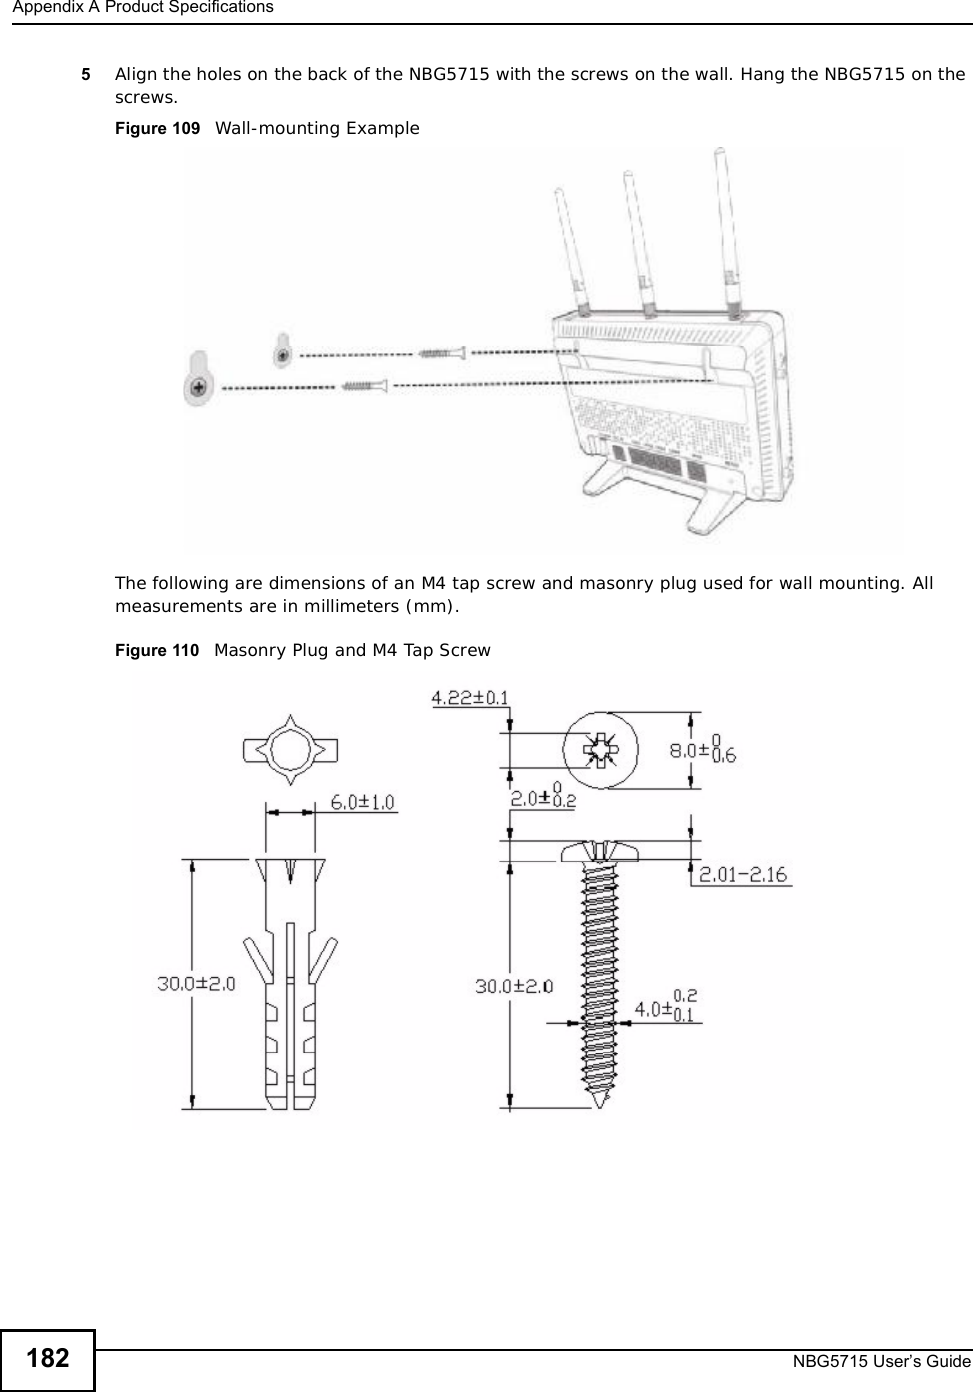 Appendix AProduct SpecificationsNBG5715 User’s Guide1825Align the holes on the back of the NBG5715 with the screws on the wall. Hang the NBG5715 on the screws.Figure 109   Wall-mounting ExampleThe following are dimensions of an M4 tap screw and masonry plug used for wall mounting. All measurements are in millimeters (mm). Figure 110   Masonry Plug and M4 Tap Screw